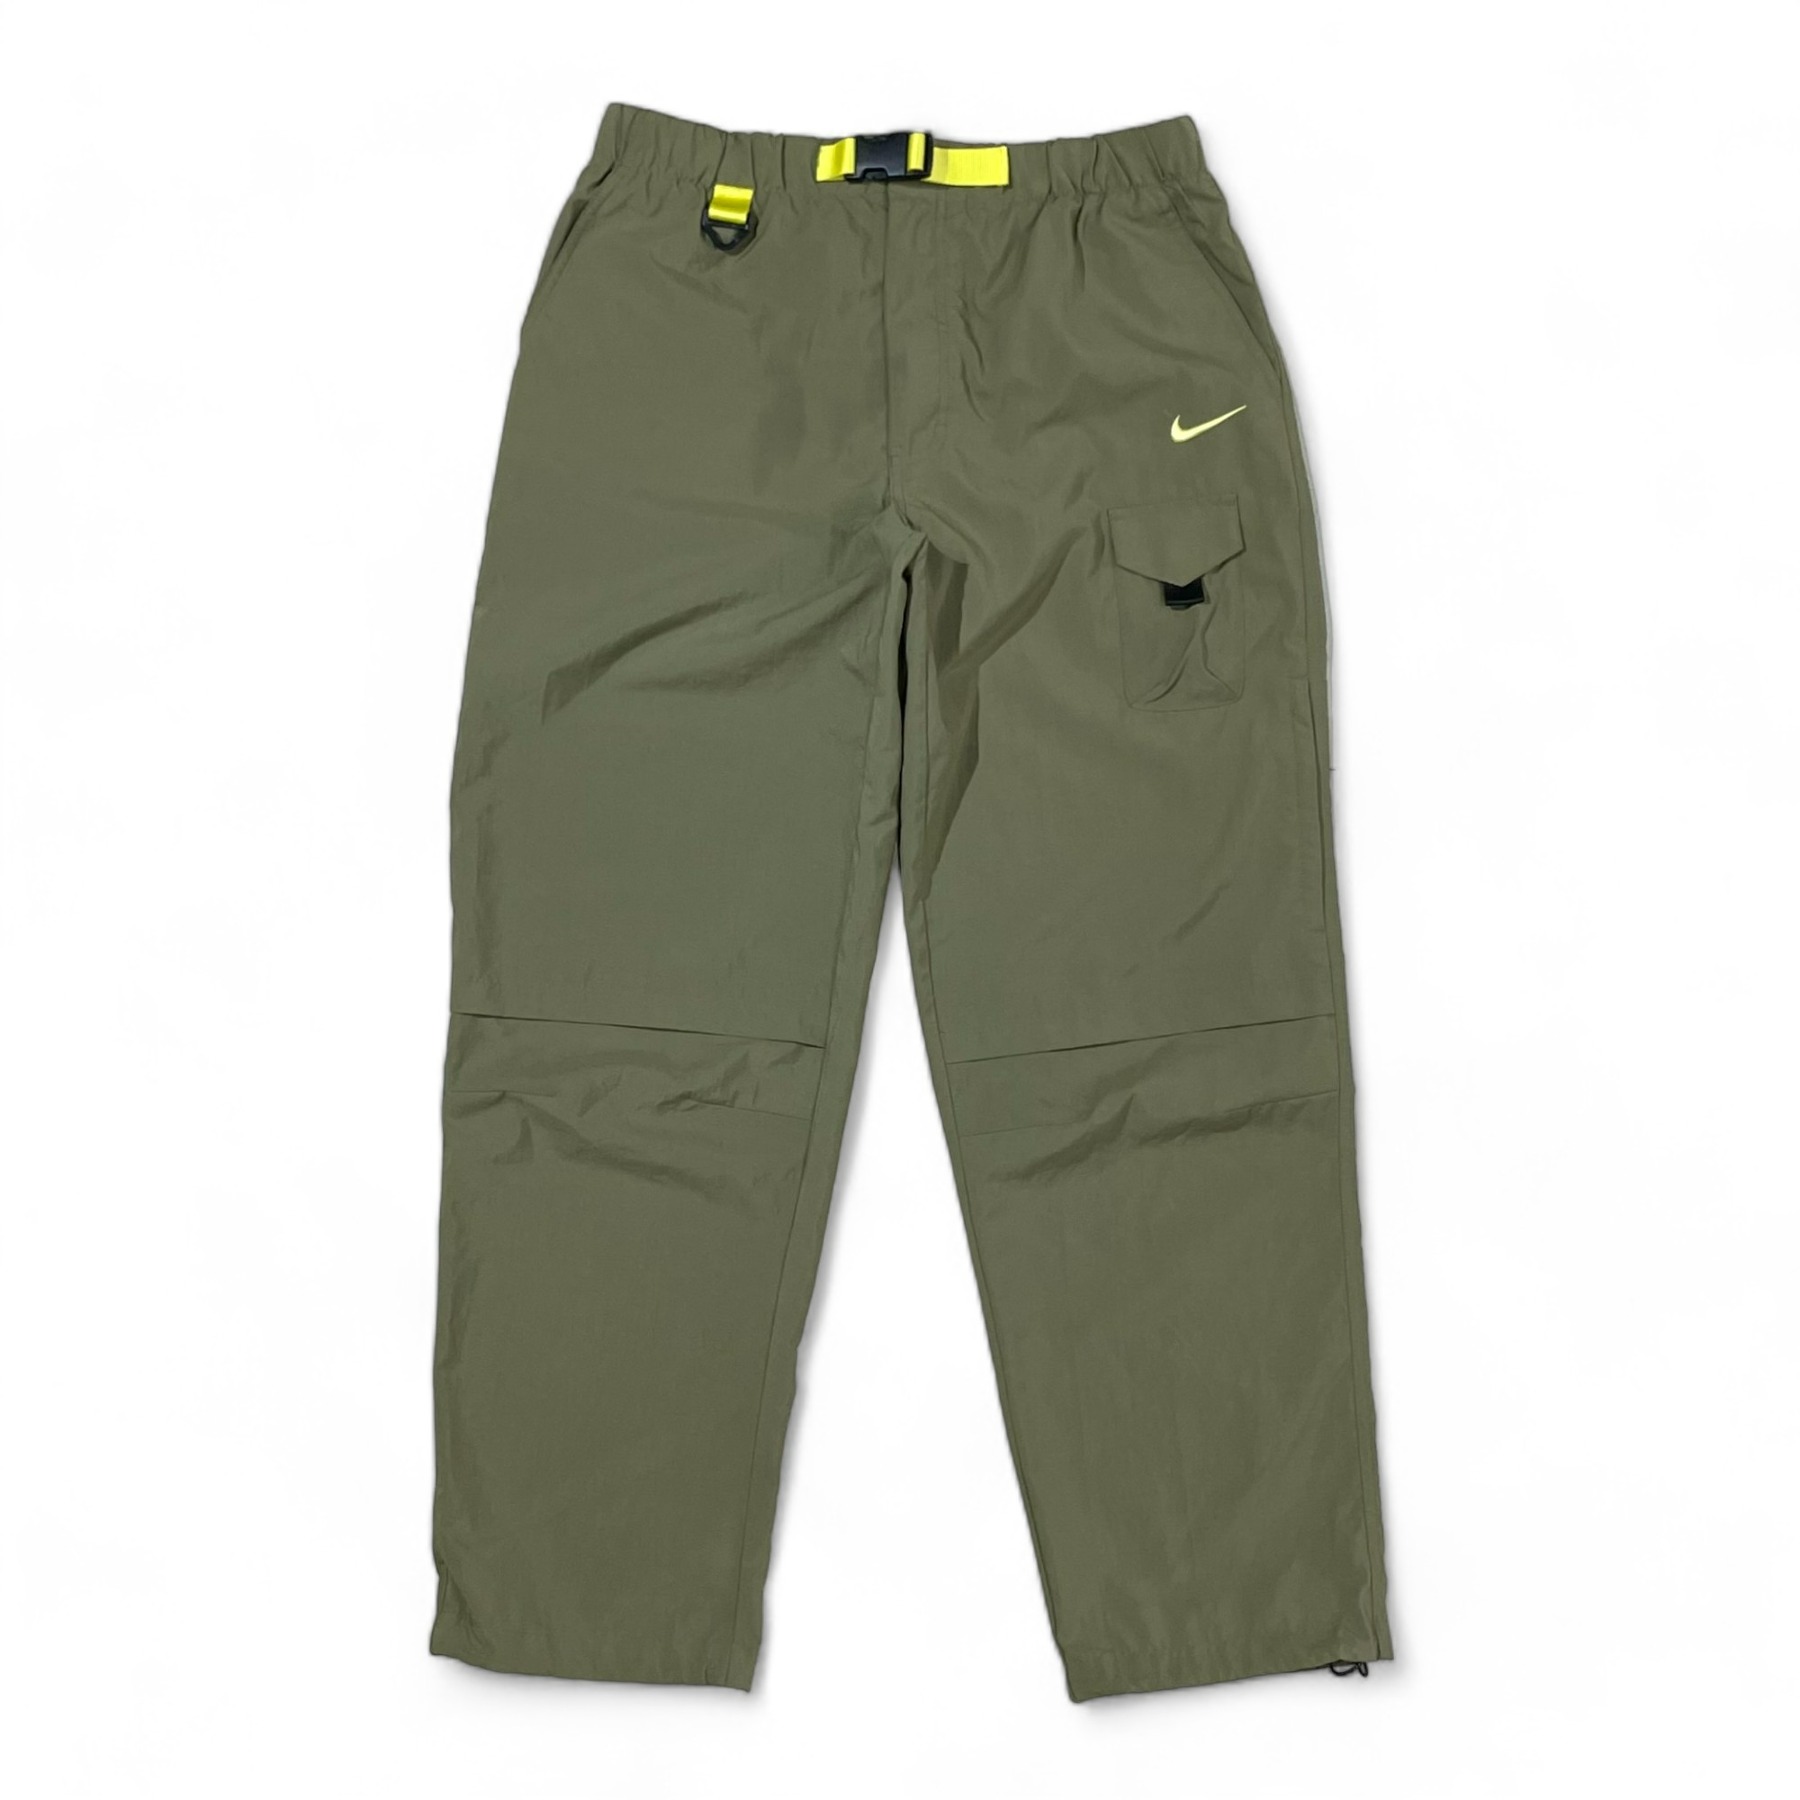 2011 NIKE The Athletic Dept. Pants - ~34inch